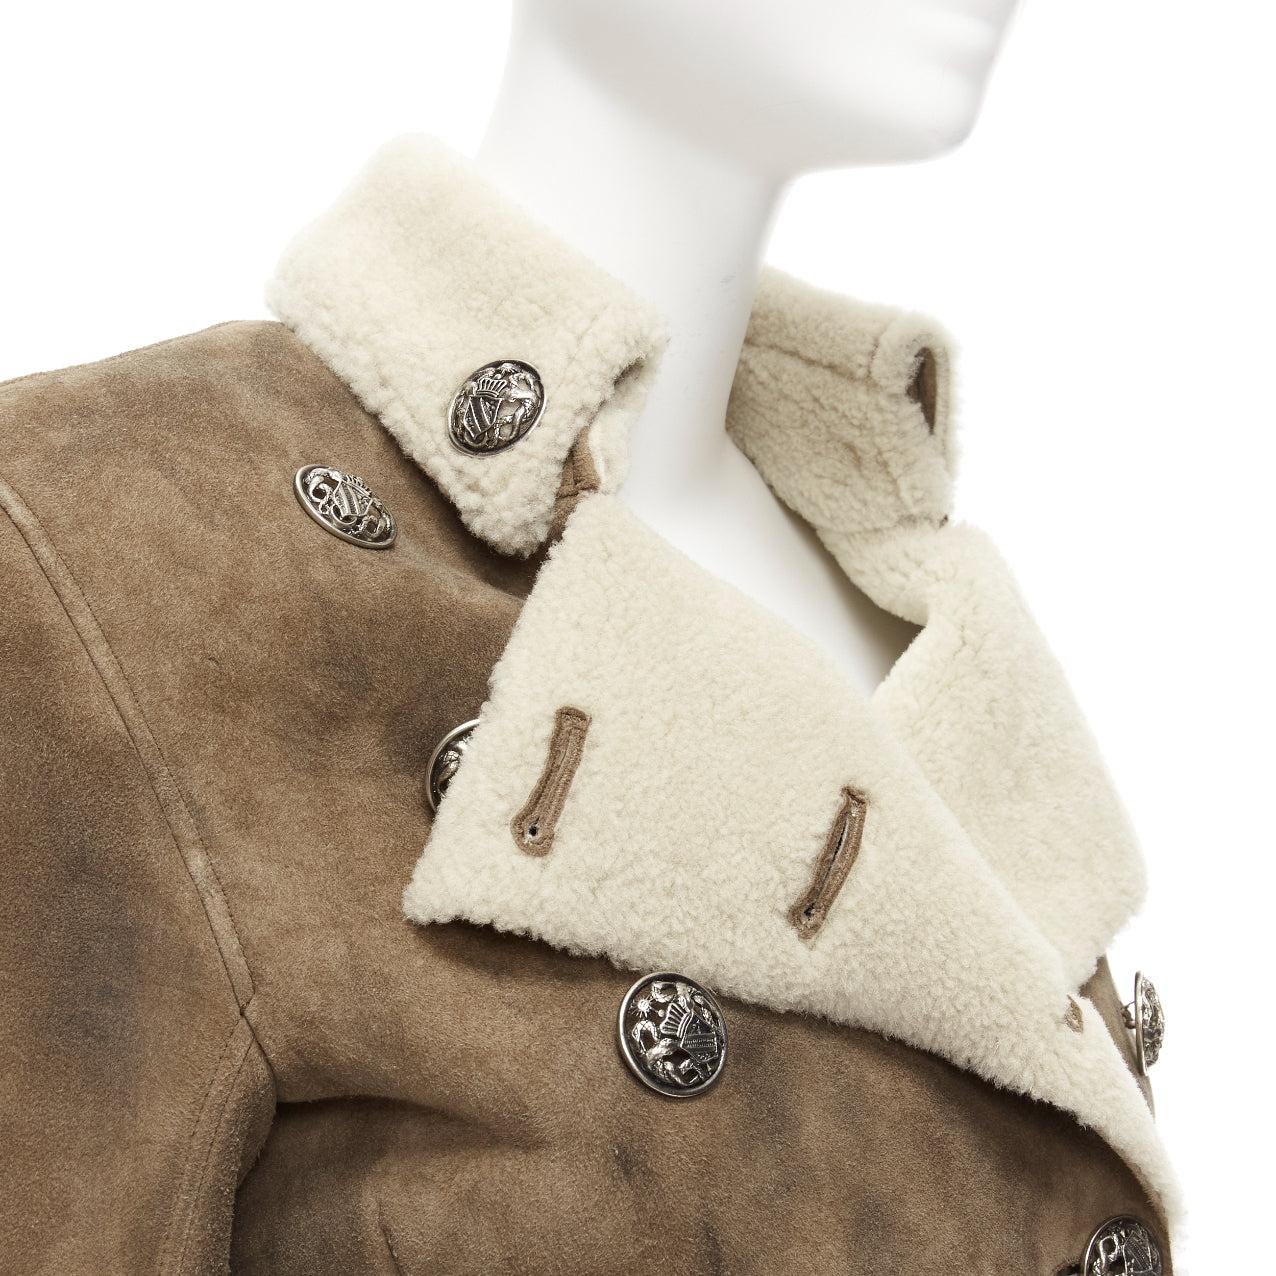 BALMAIN brown beige genuine lambskin shearling long fitted officer coat FR36 S
Reference: NKLL/A00138
Brand: Balmain
Designer: Olivier Rousteing
Material: Shearling, Lambskin Leather
Color: Brown, Beige
Pattern: Solid
Closure: Button
Lining: Beige